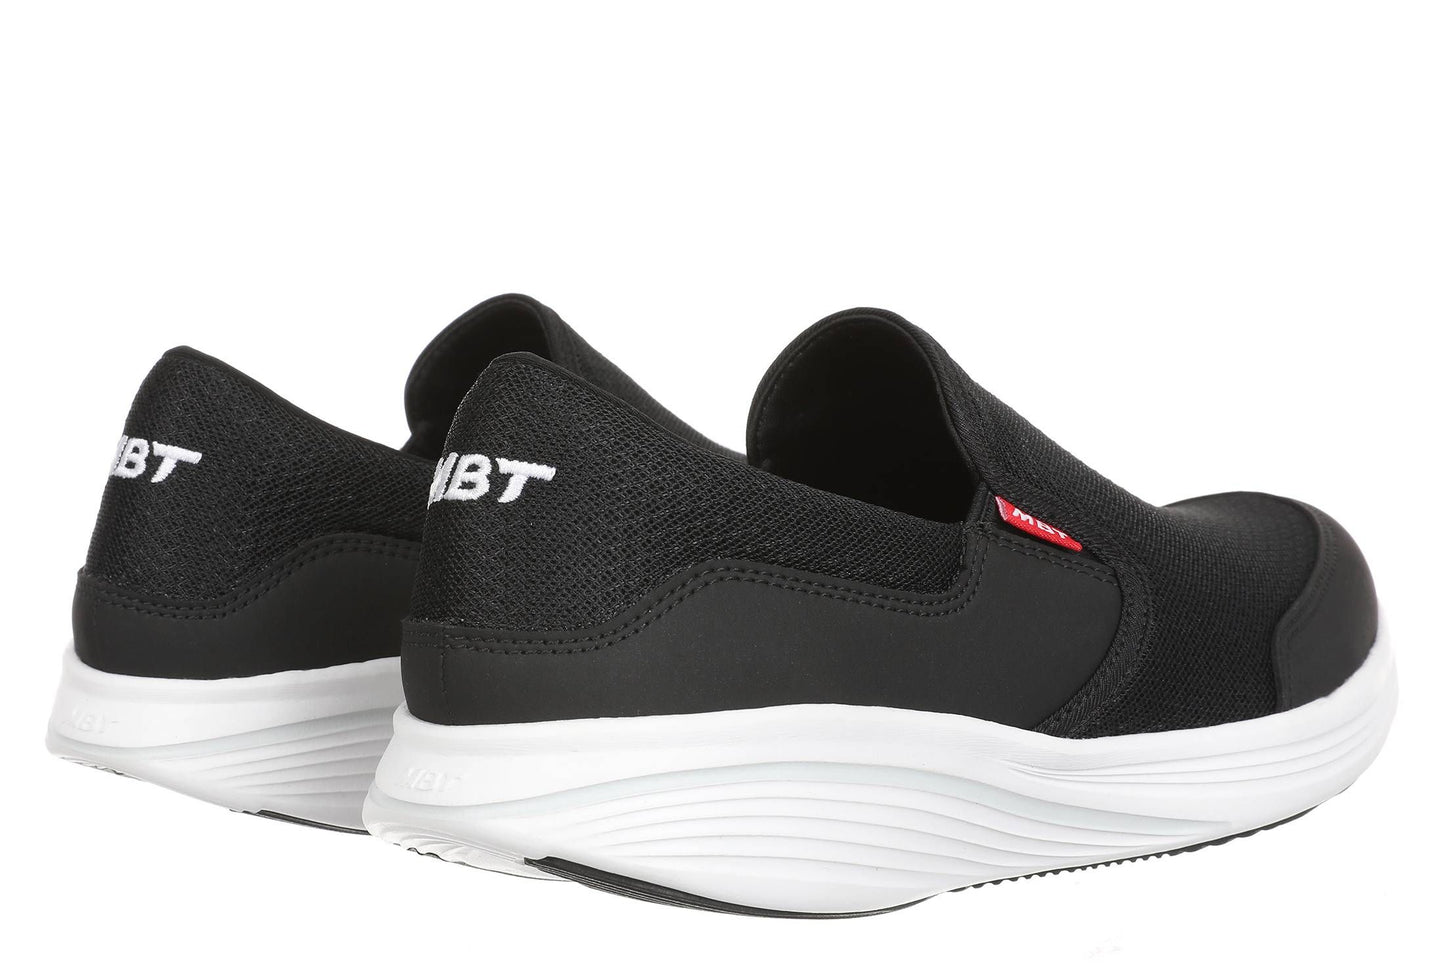 MBT Modena III Slip on sneakers donna